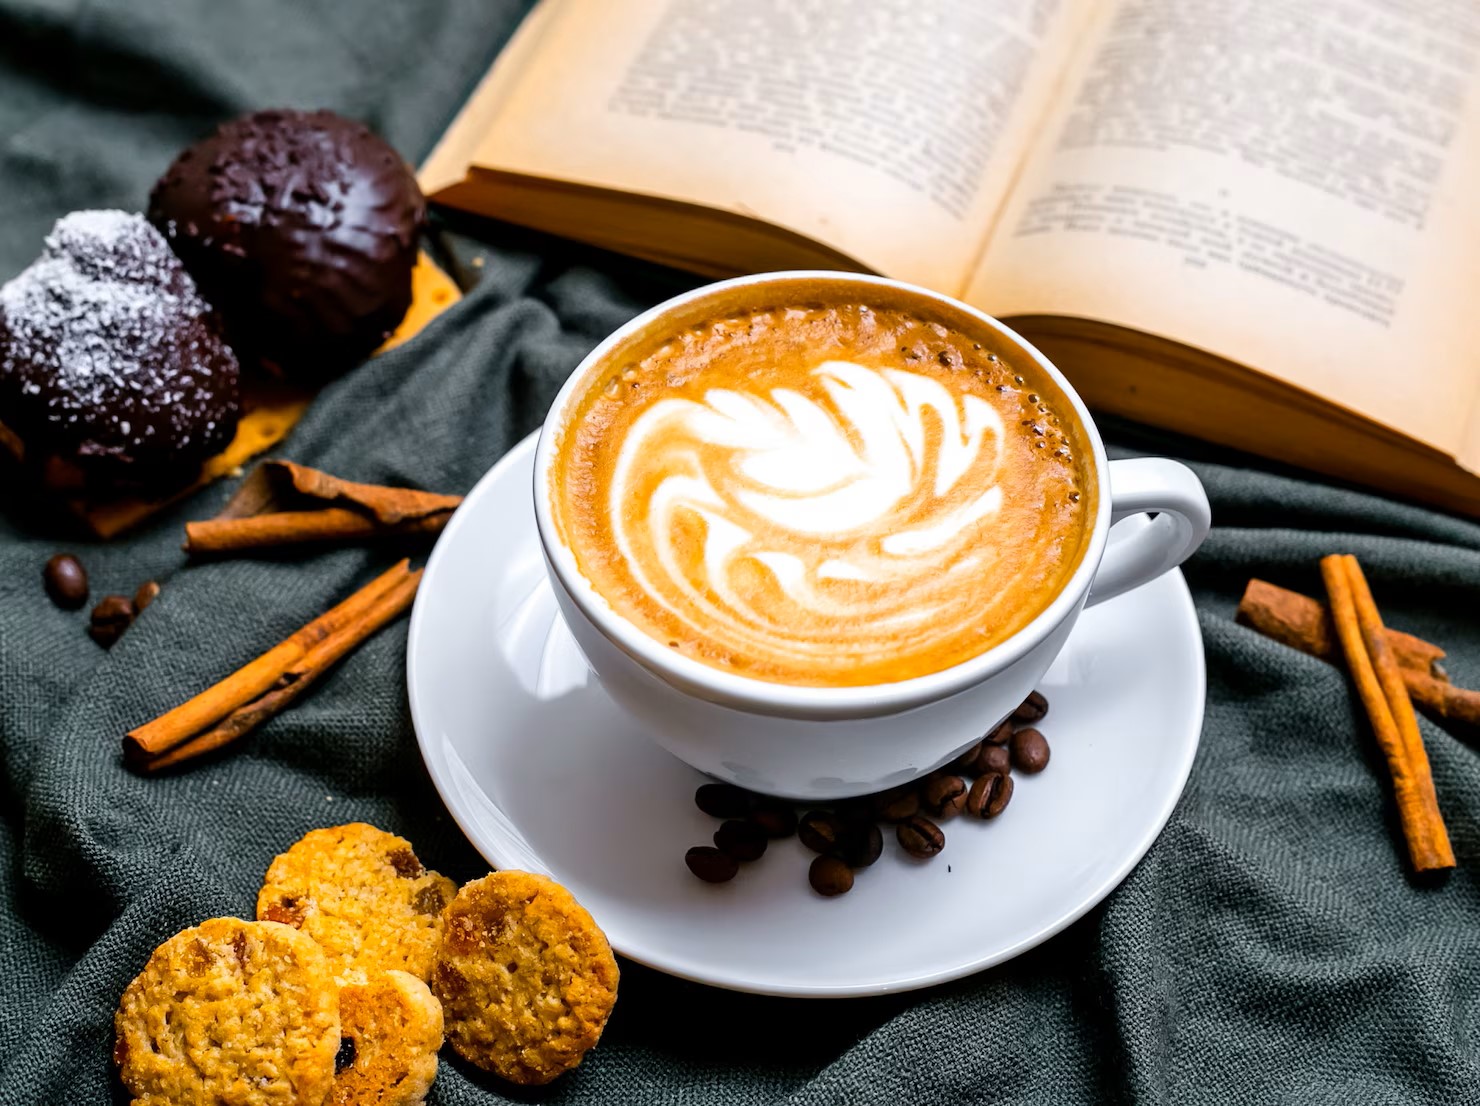 top-view-cup-of-cappuccino-with-chocolate-cookies-and-raisin-cookies-and-with-a-book-on-the-table_141793-2880.jpg